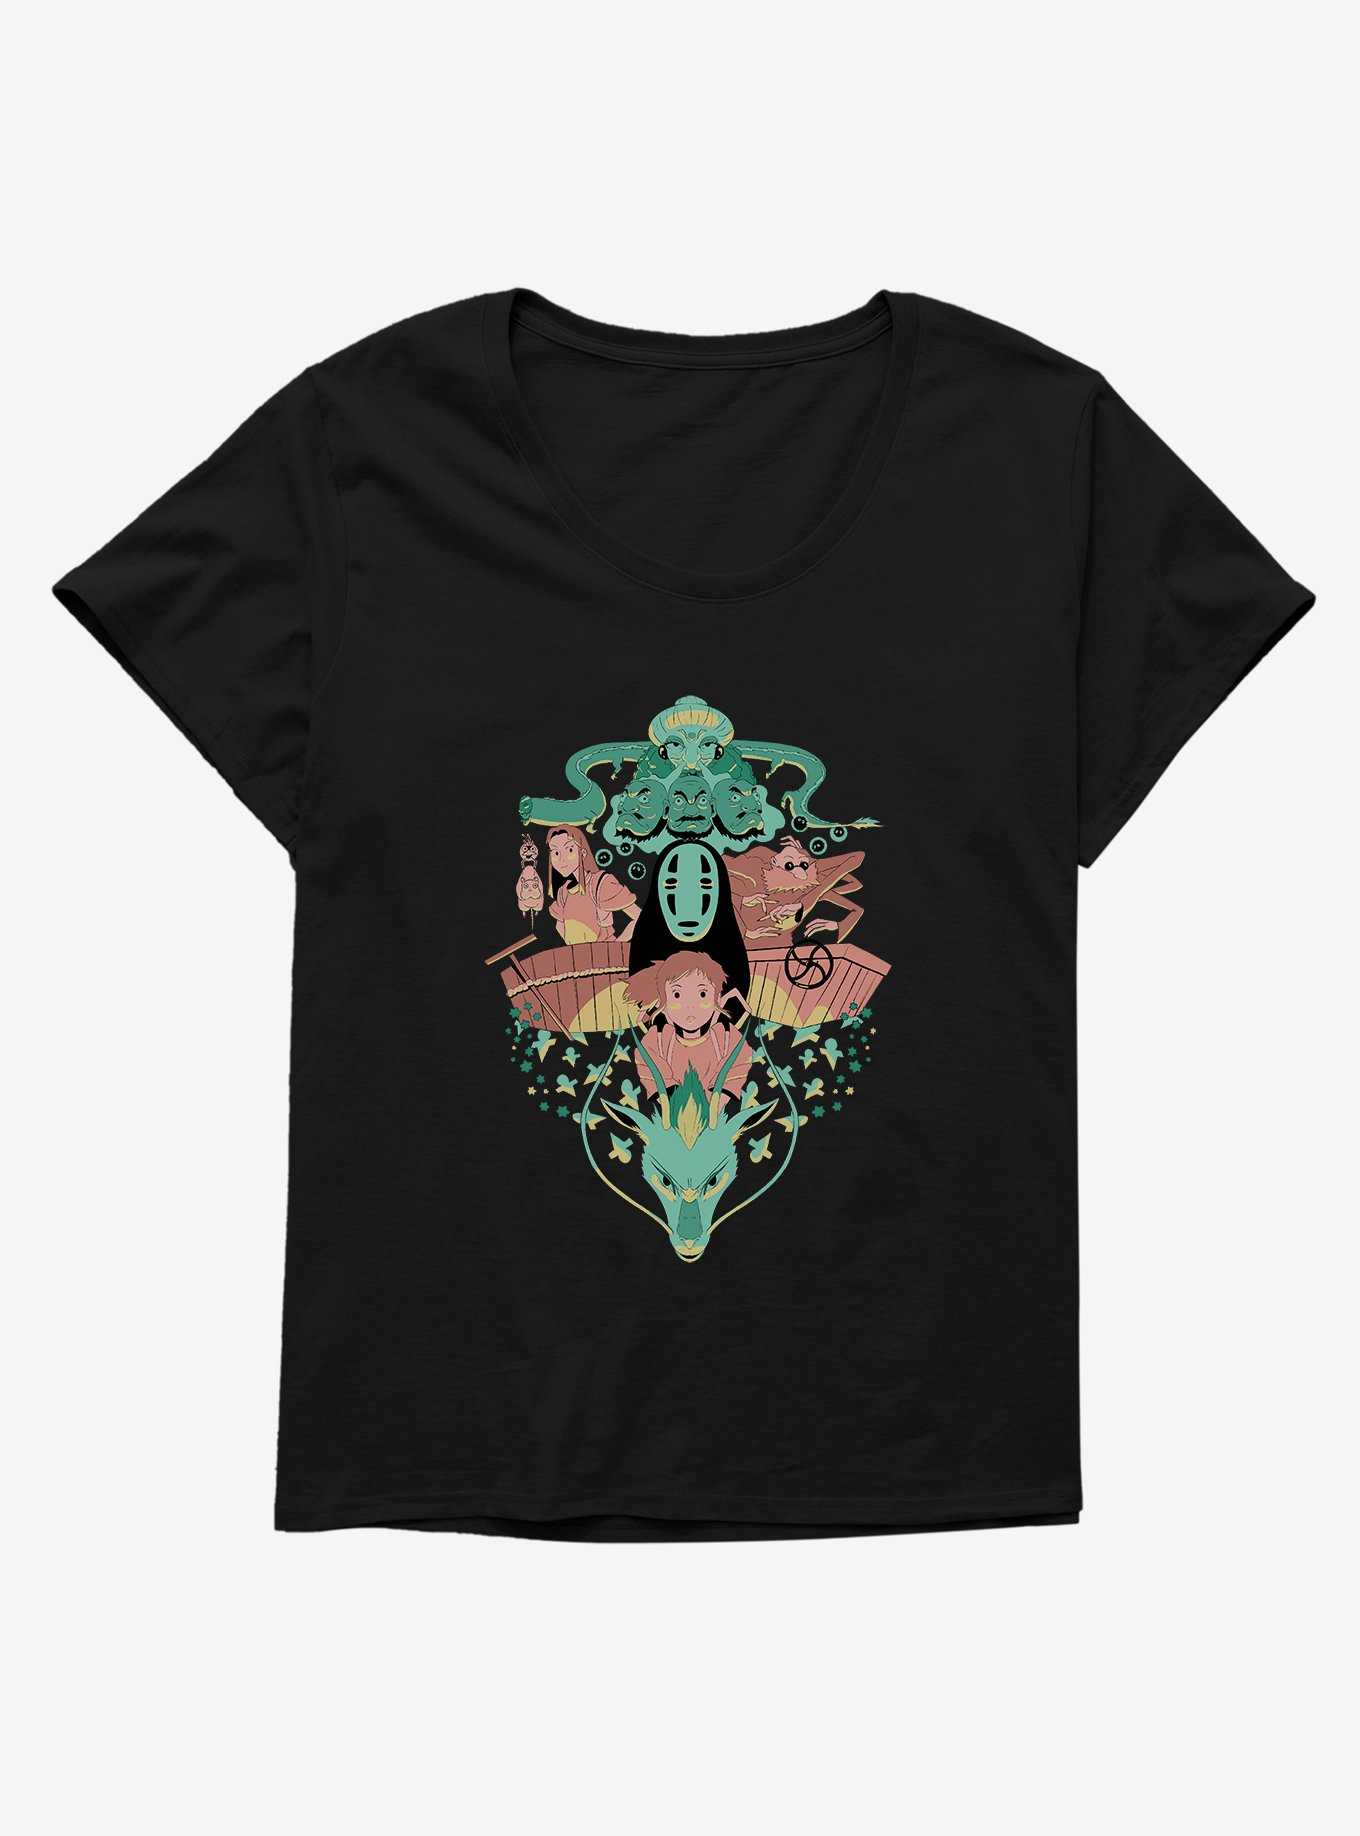 Studio Ghibli Spirited Away Chihiro And No Face Group Crest Girls T-Shirt Plus Size, , hi-res